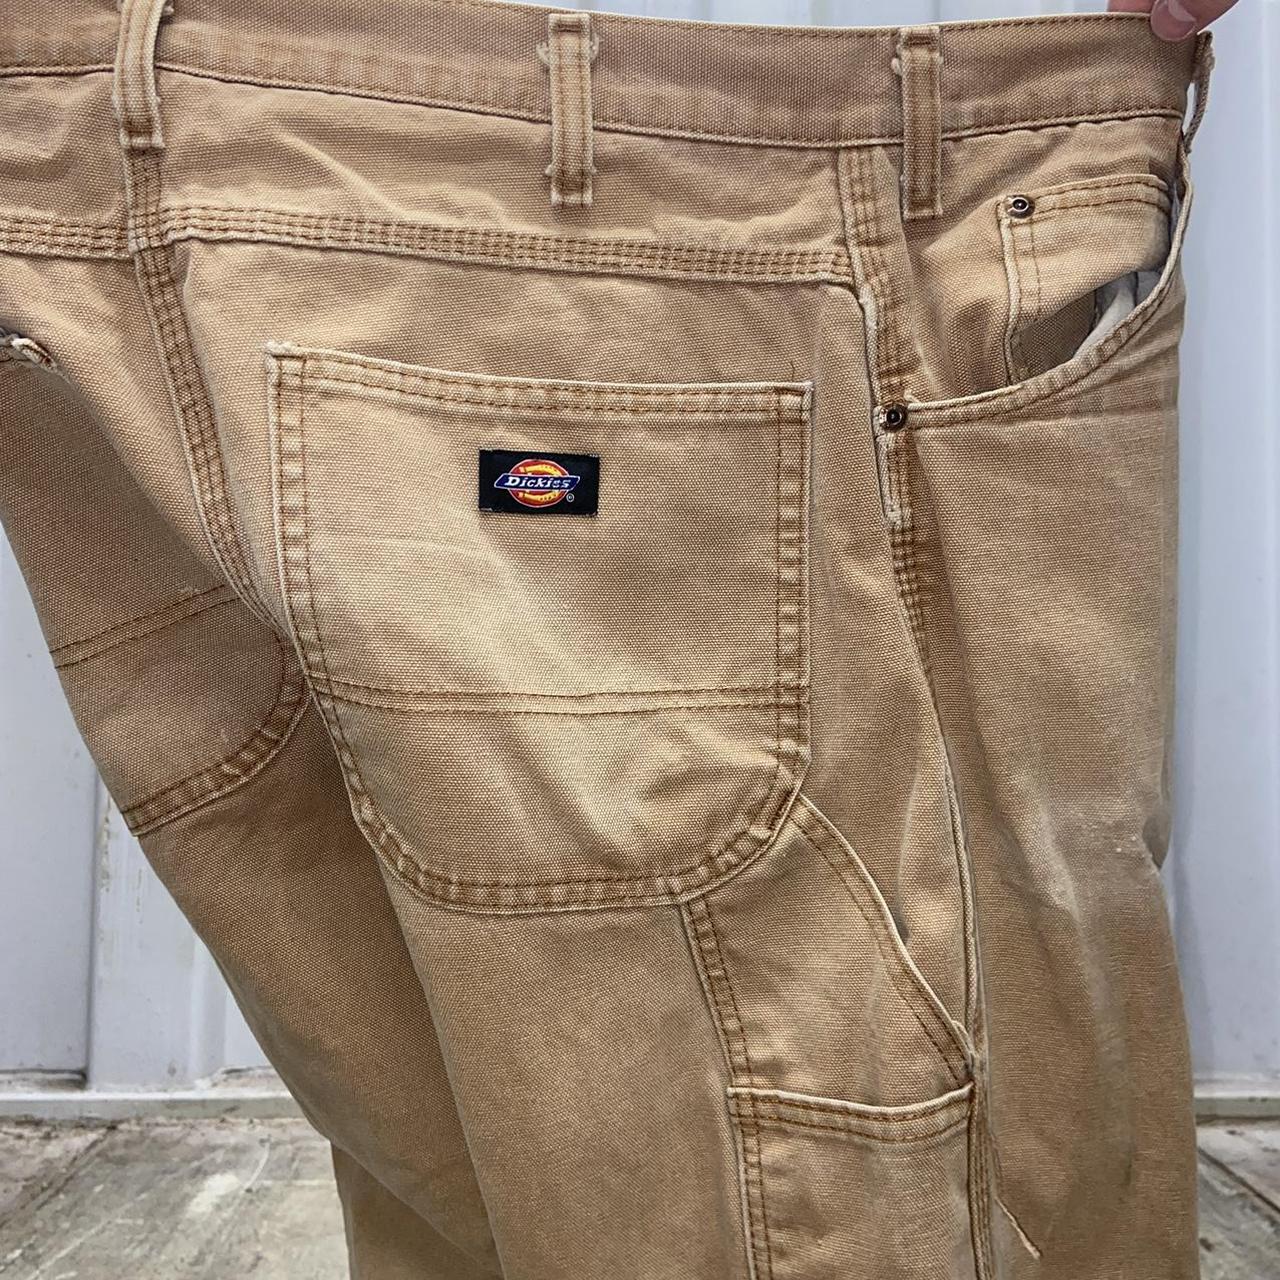 Work Pants Stan Ray Dickies Carhartt  Streetwear men outfits Mens  outfits Guys clothing styles